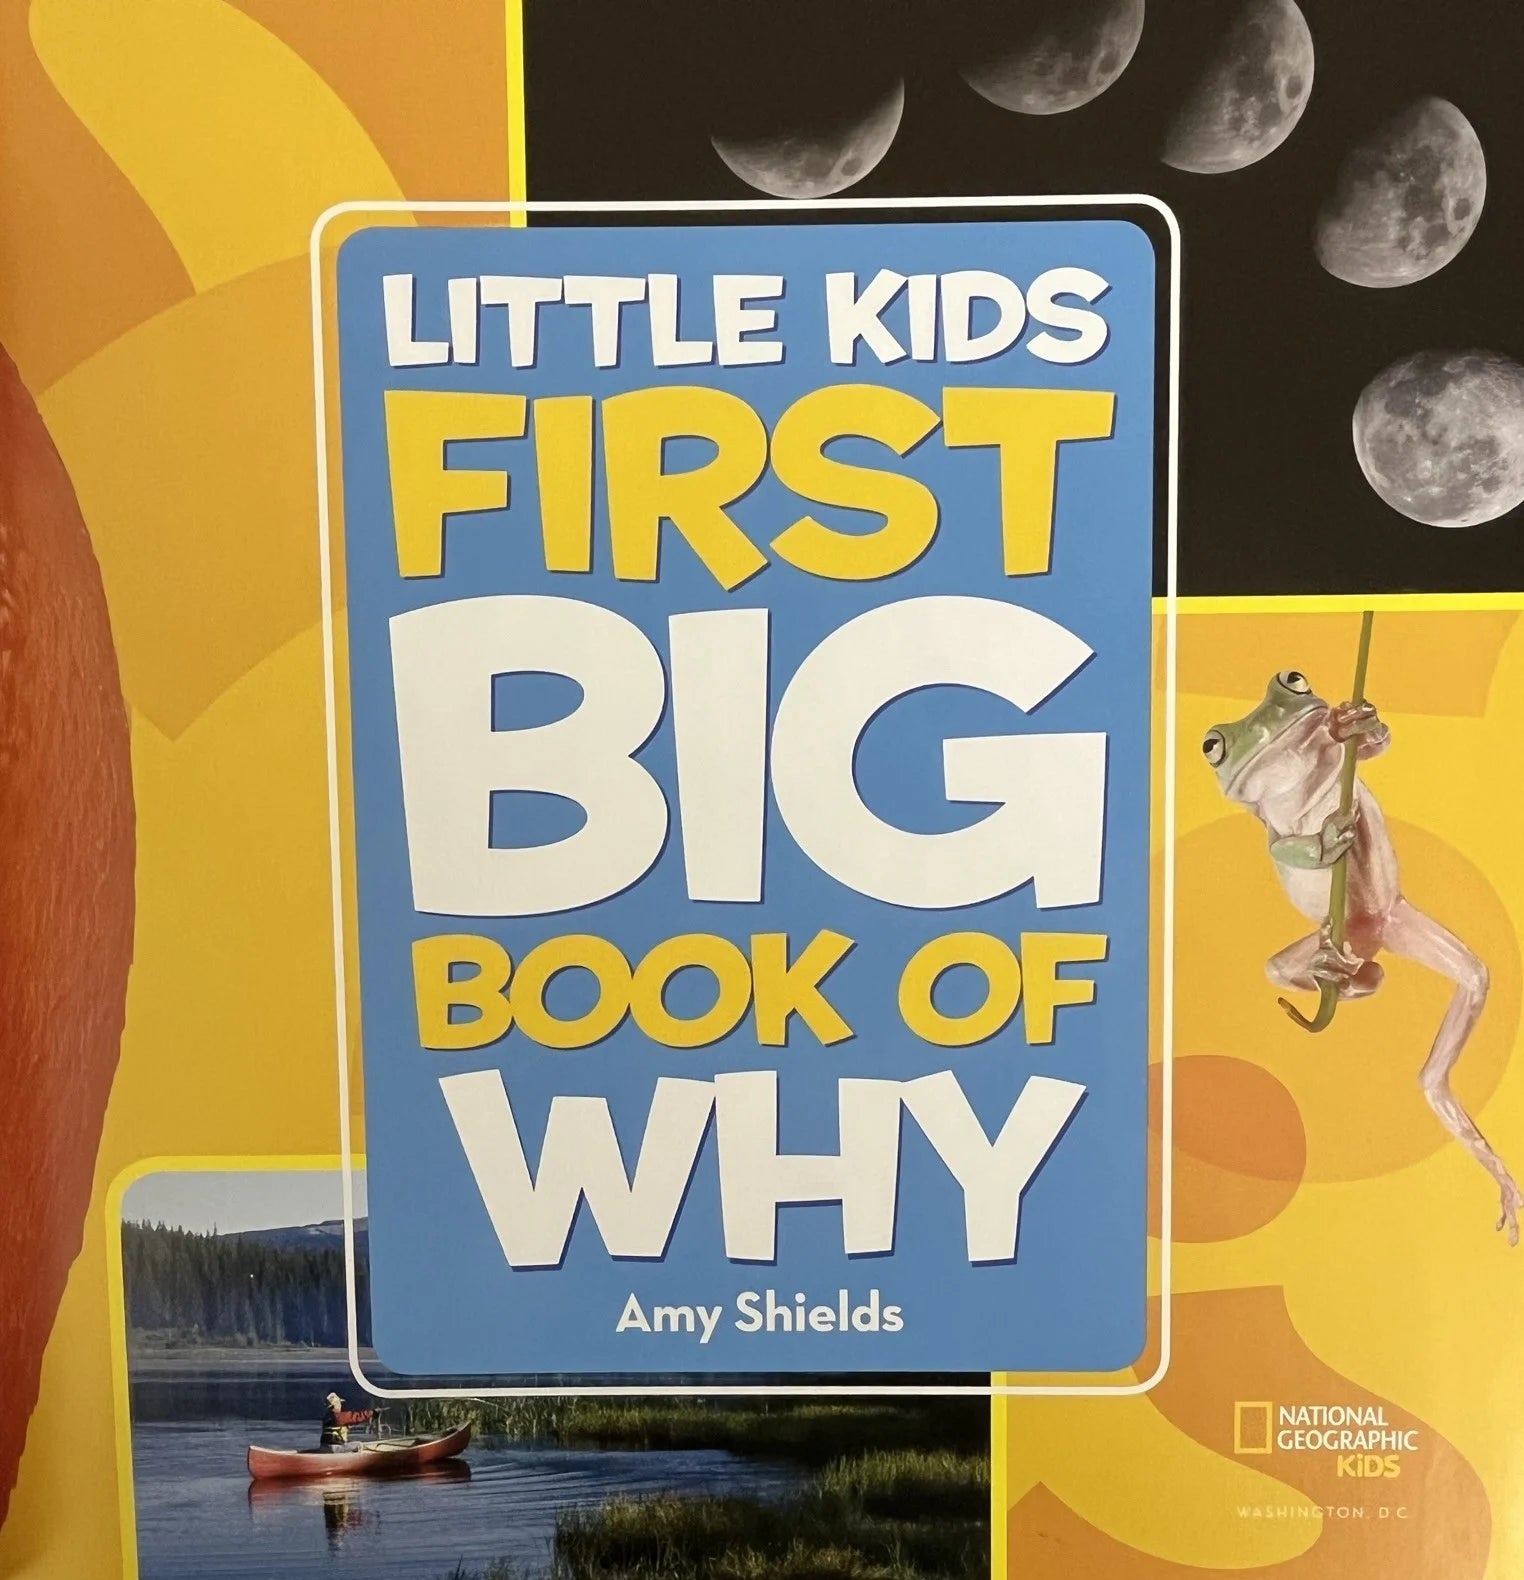 National Geographic Little Kids First Big Book of Why - MakoStars Online Store